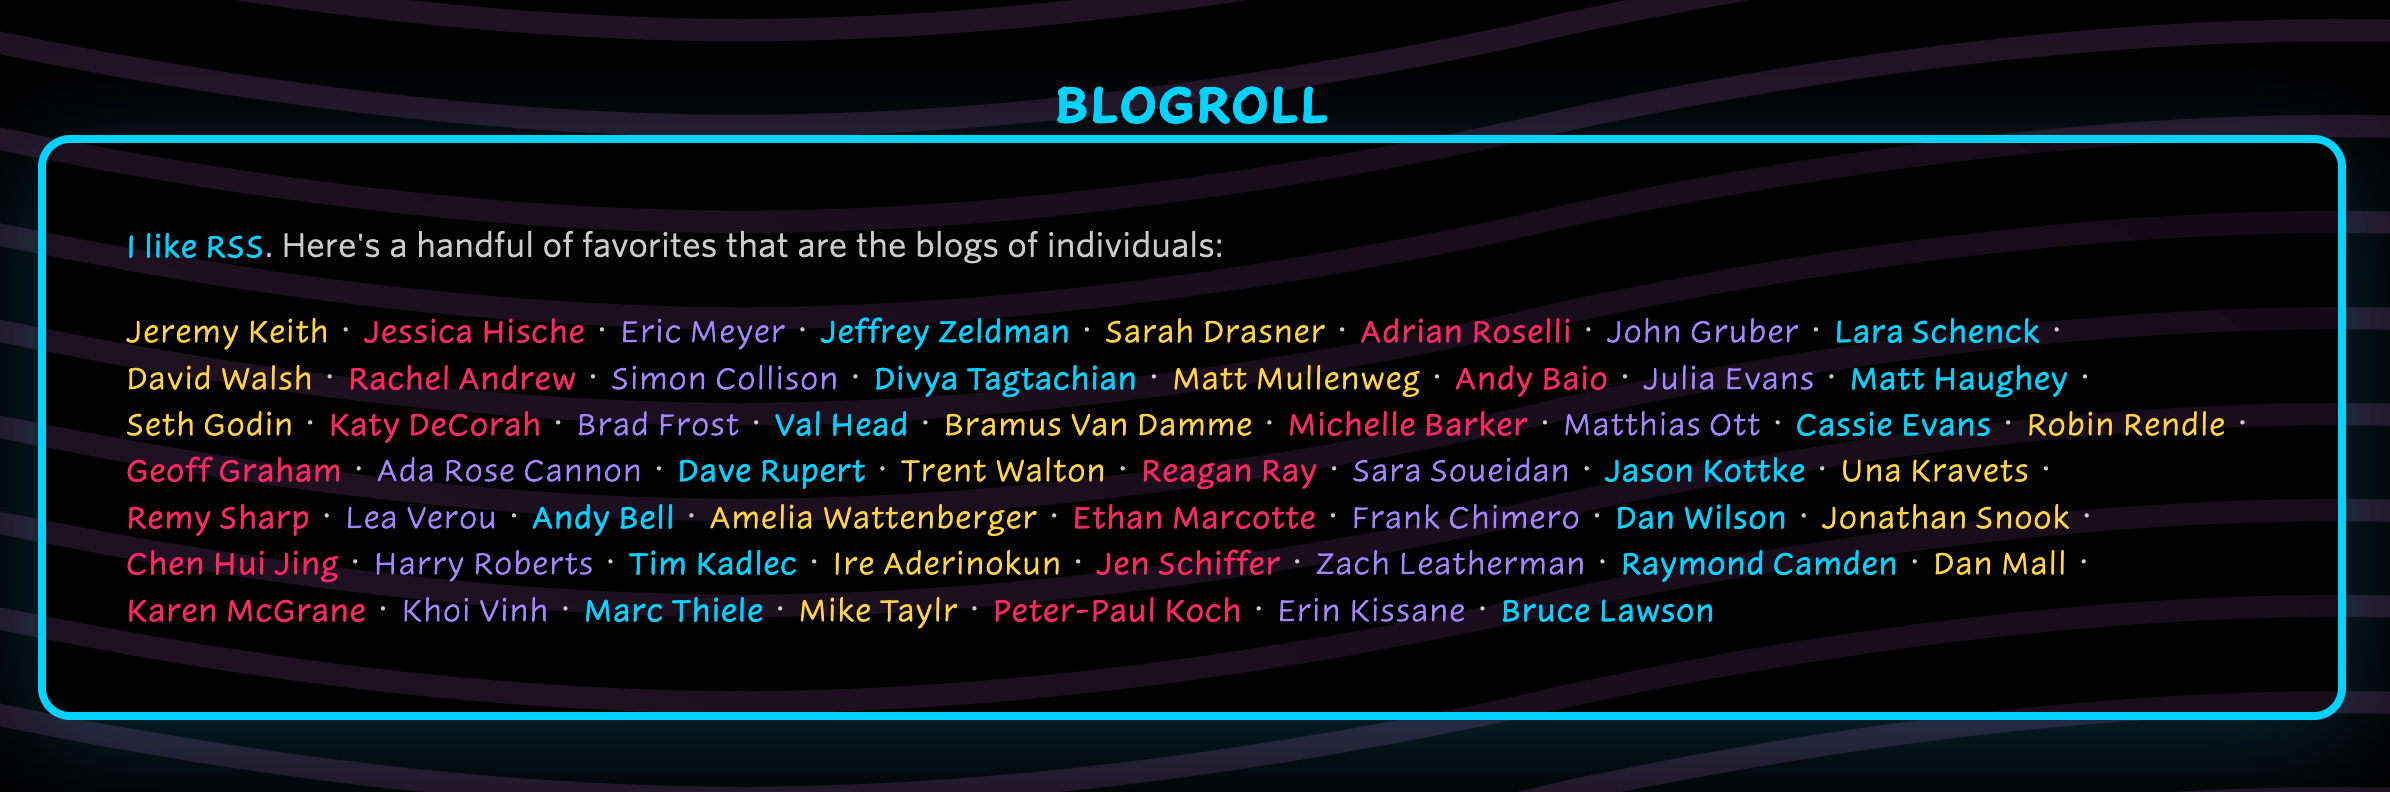 Screenshot of the blogroll on Chris Coyier's personal website, showing lots of brightly colored links with the names of blogs included in the blogroll.